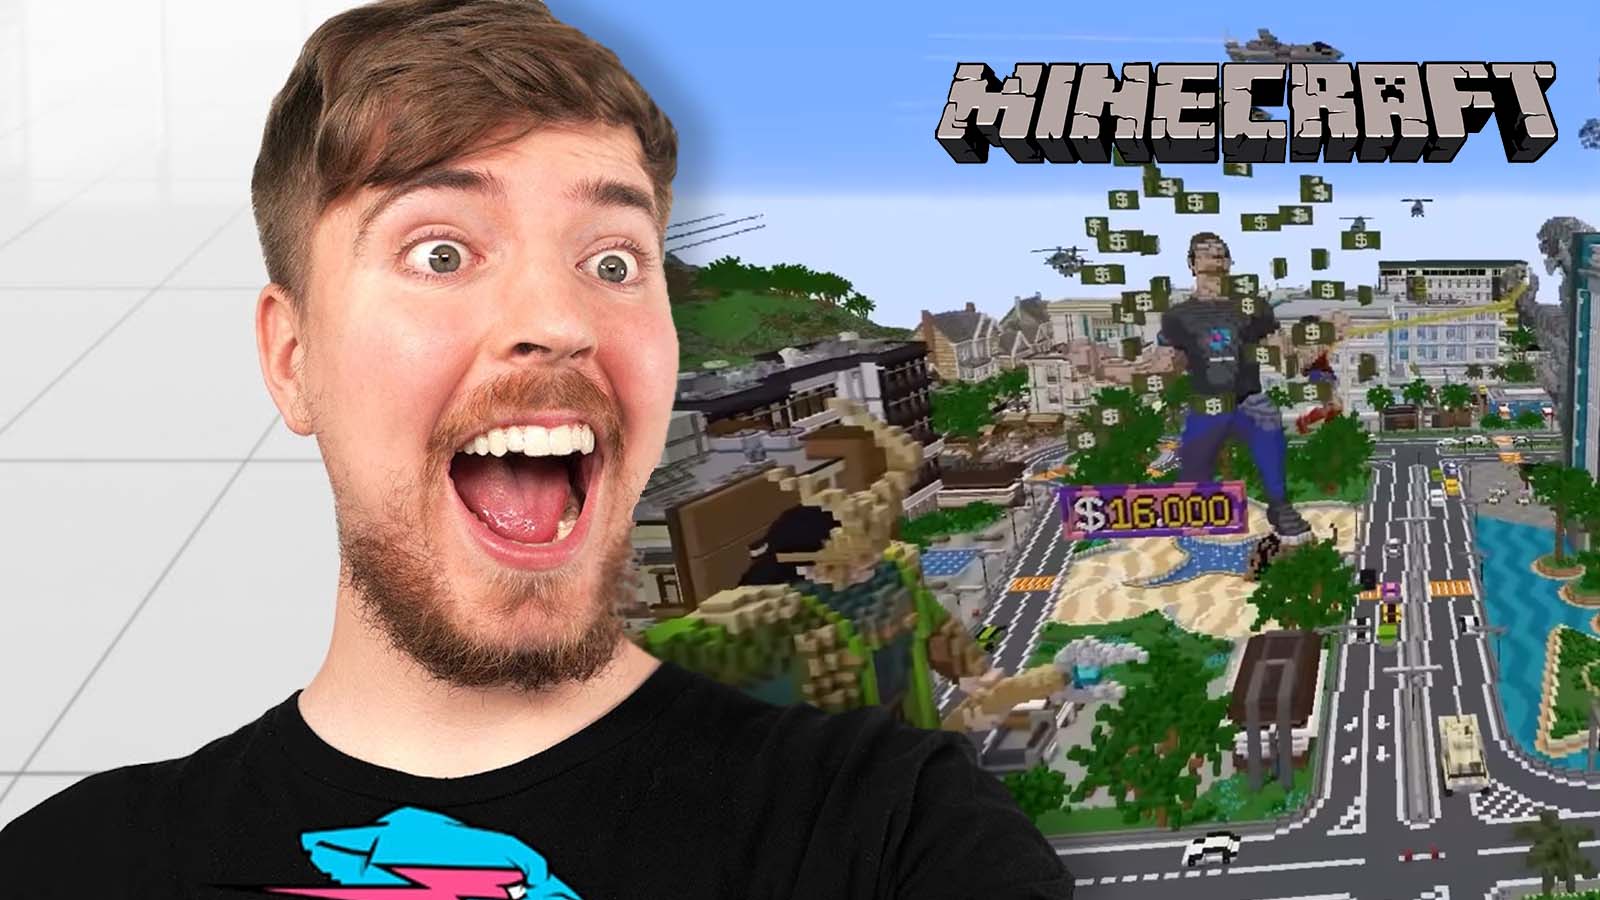 MrBeast paid five-figures for Minecraft pros to build him a custom house